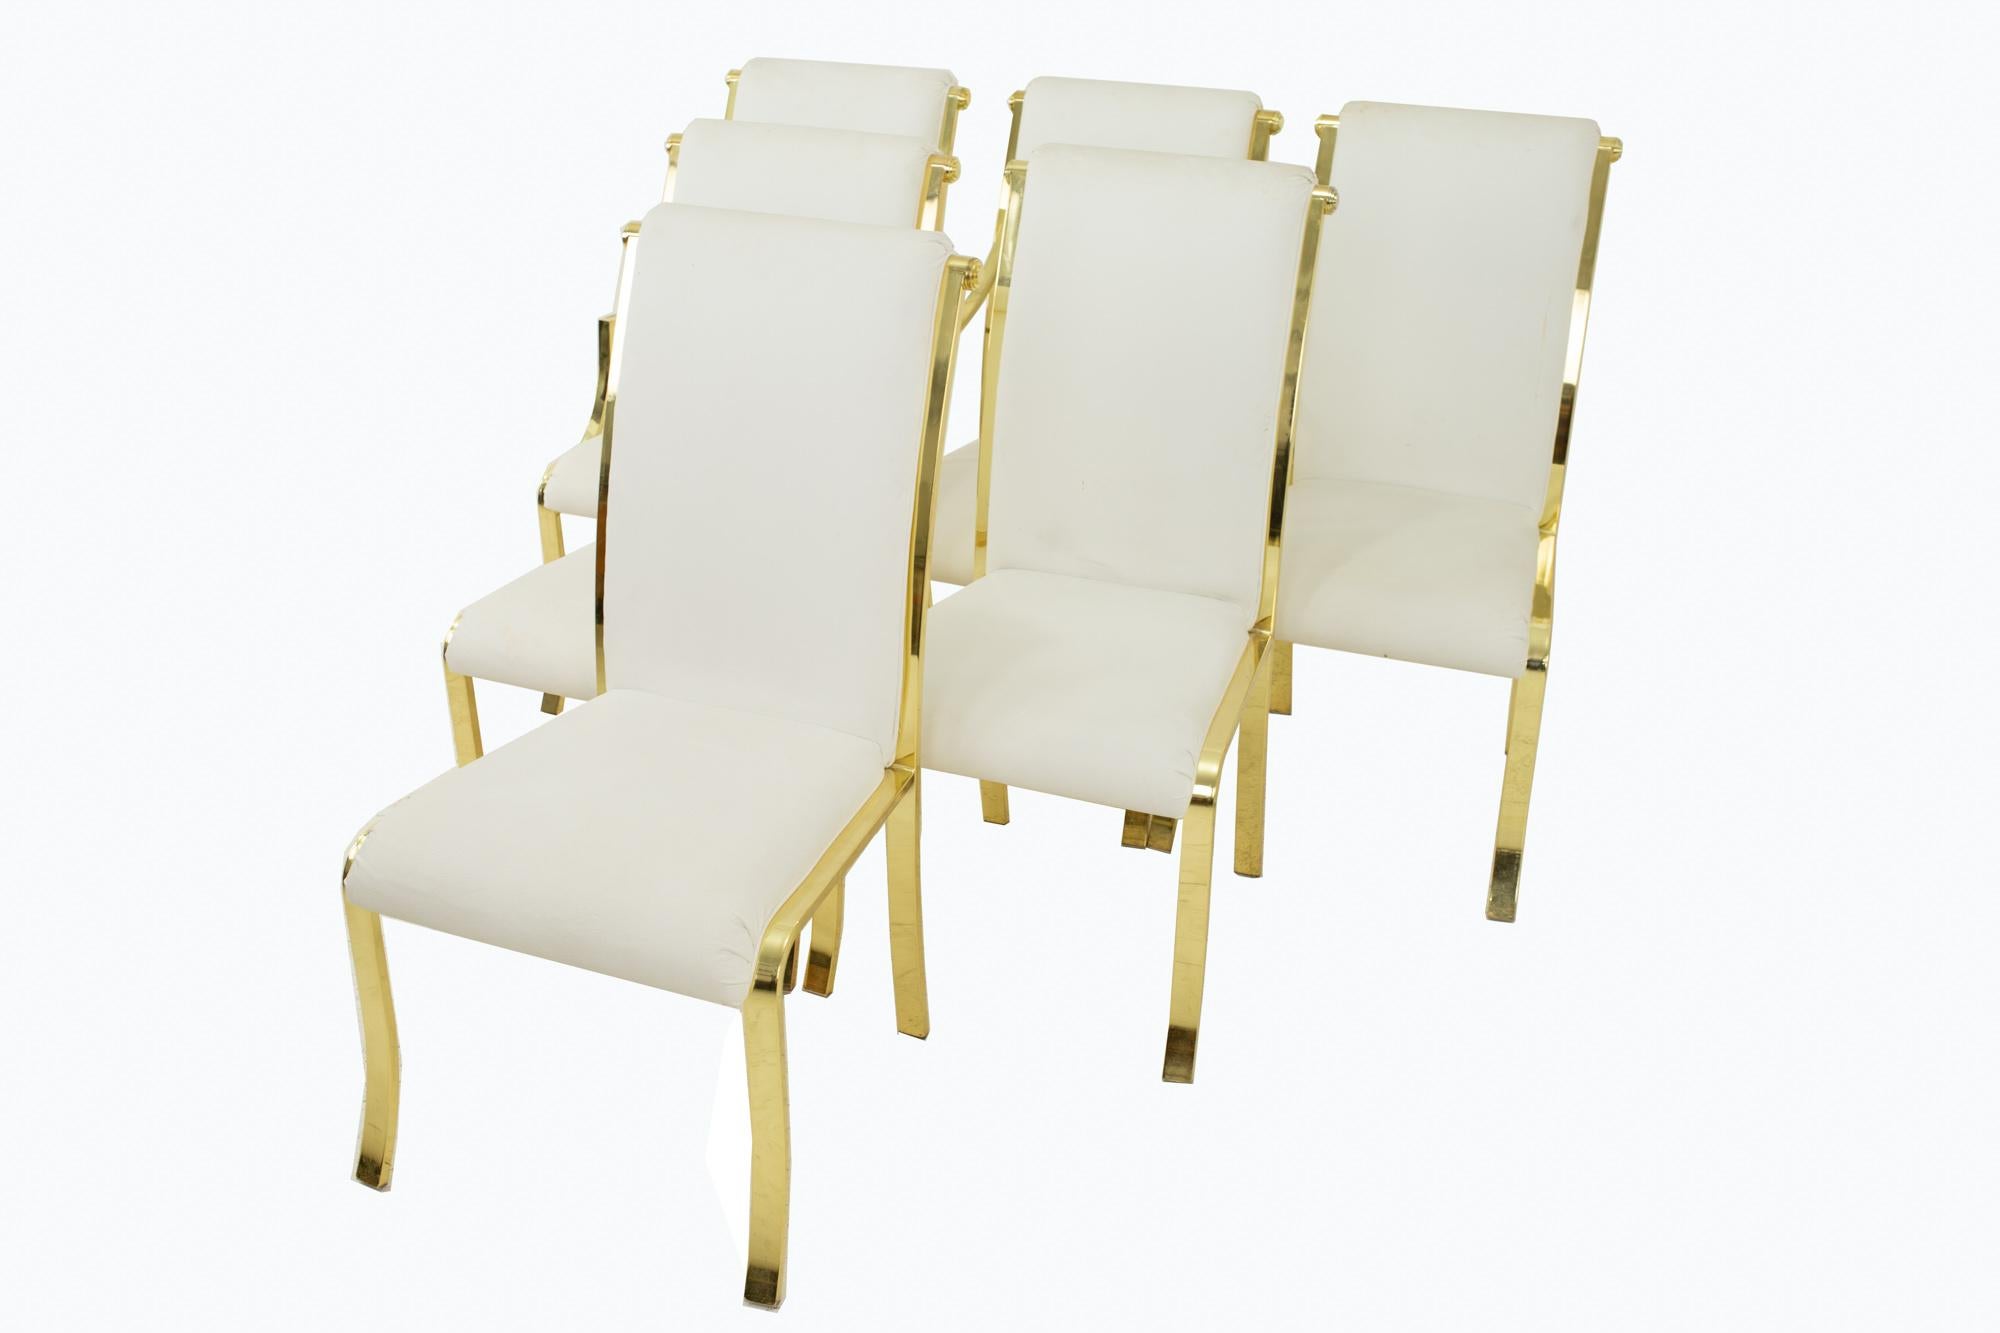 Design Institute of America DIA white and brass dining chairs - Set of 6
Each chair measures: 19.75 wide x 20 deep x 40.5 high, with a seat height of 19 inches

All pieces of furniture can be had in what we call restored vintage condition. That